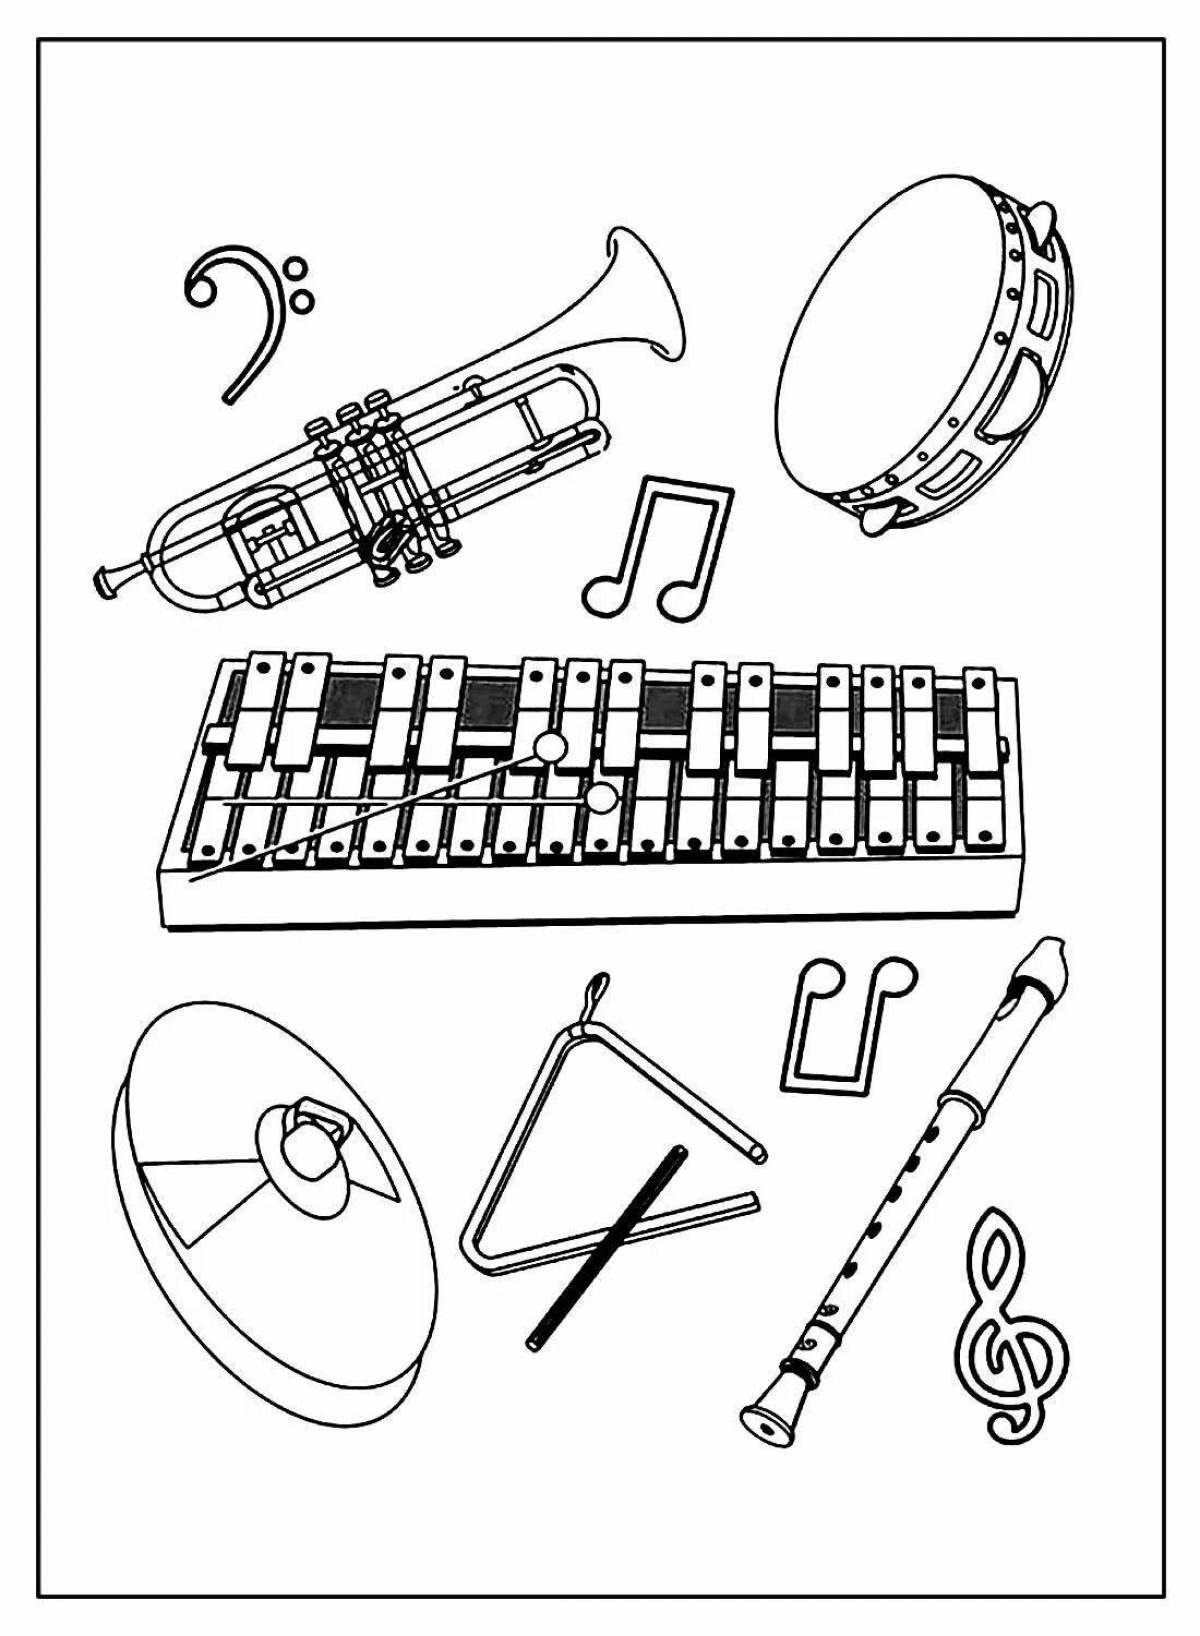 Colouring funny musical instruments